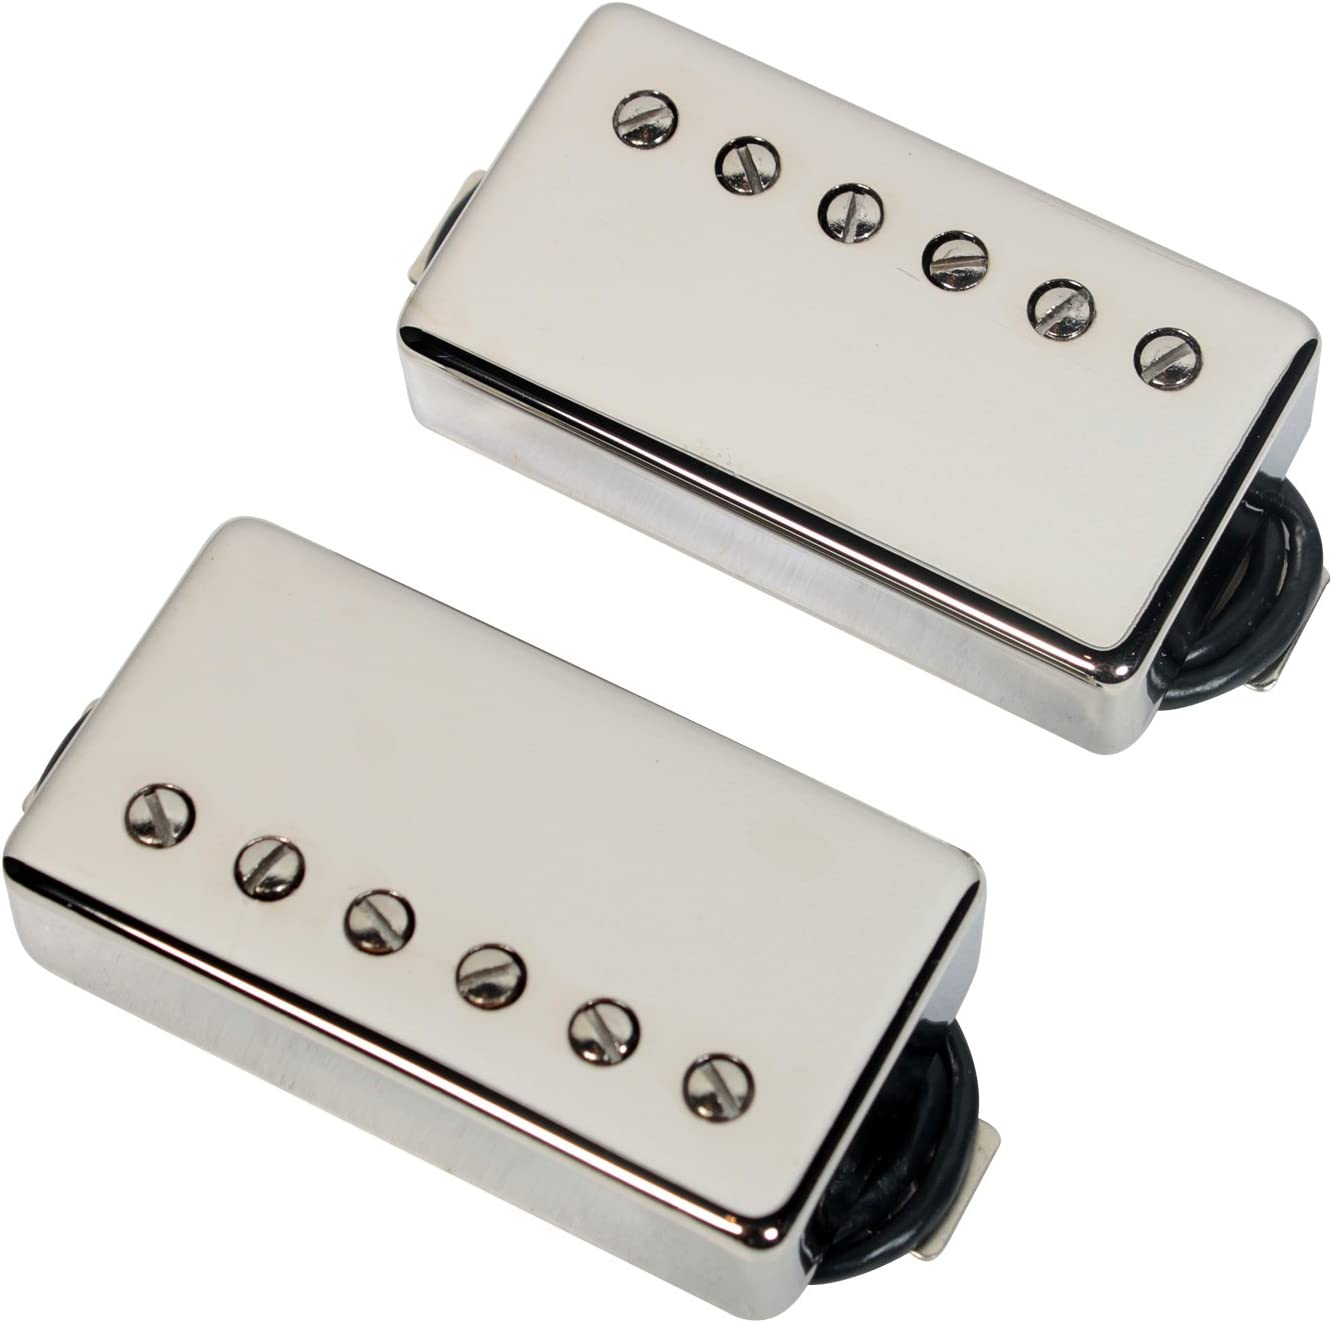 Seymour Duncan Pearly Gates SH-PG1n/1b Pickup on a white background